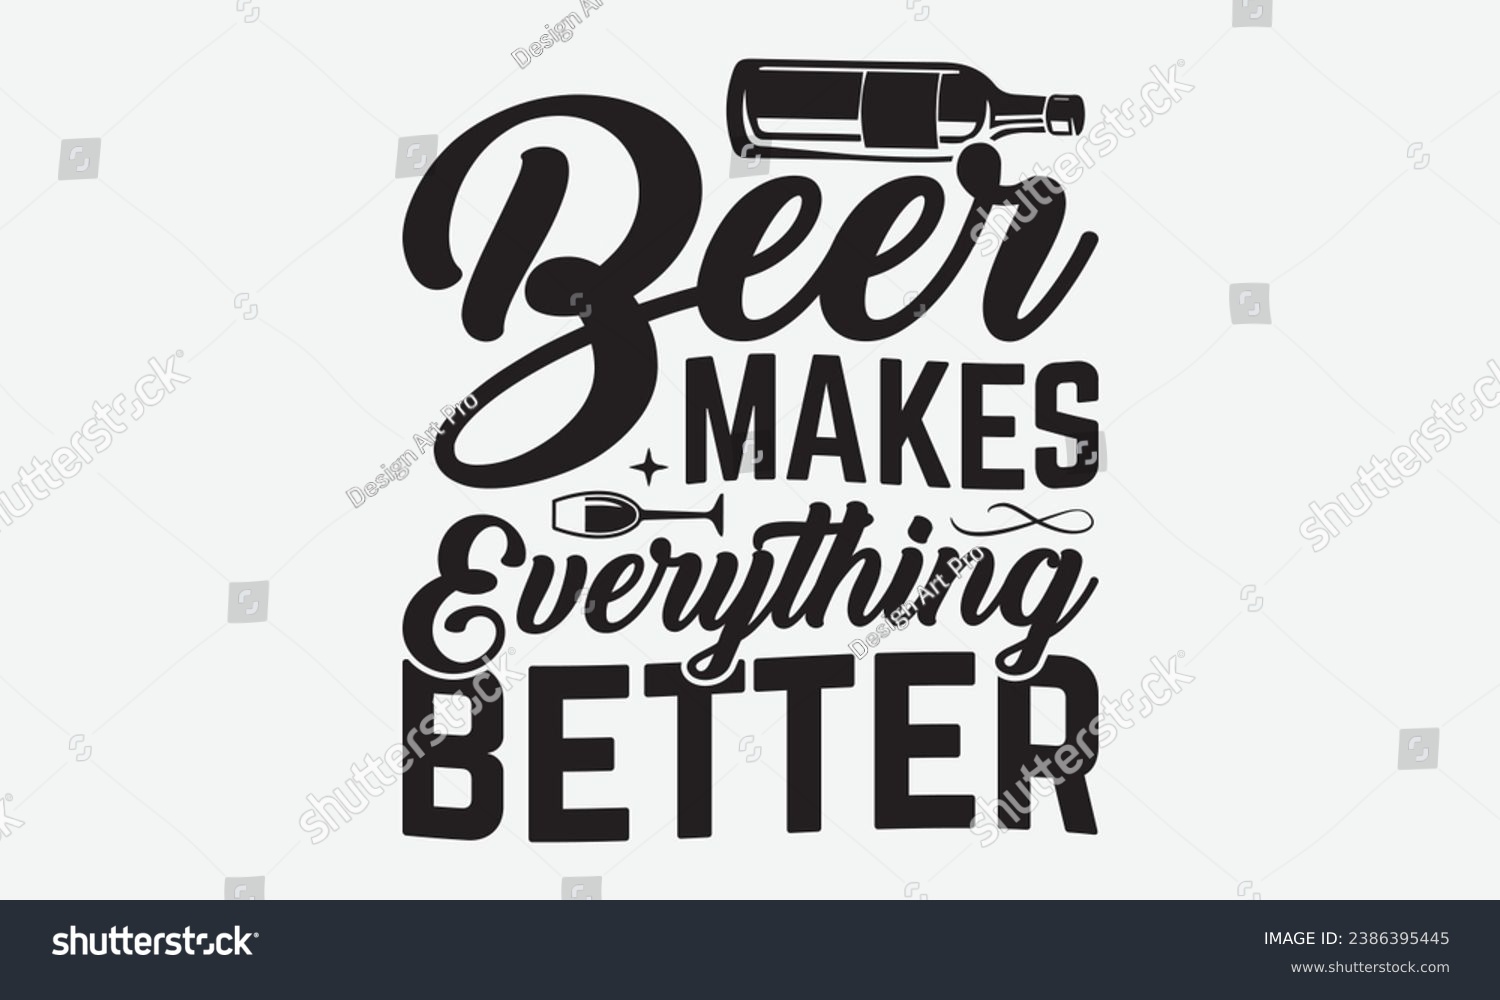 SVG of Beer Makes Everything Better -Beer T-Shirt Design, Modern Calligraphy, Illustration For Mugs, Hoodie, Bags, Posters, Vector Files Are Editable. svg